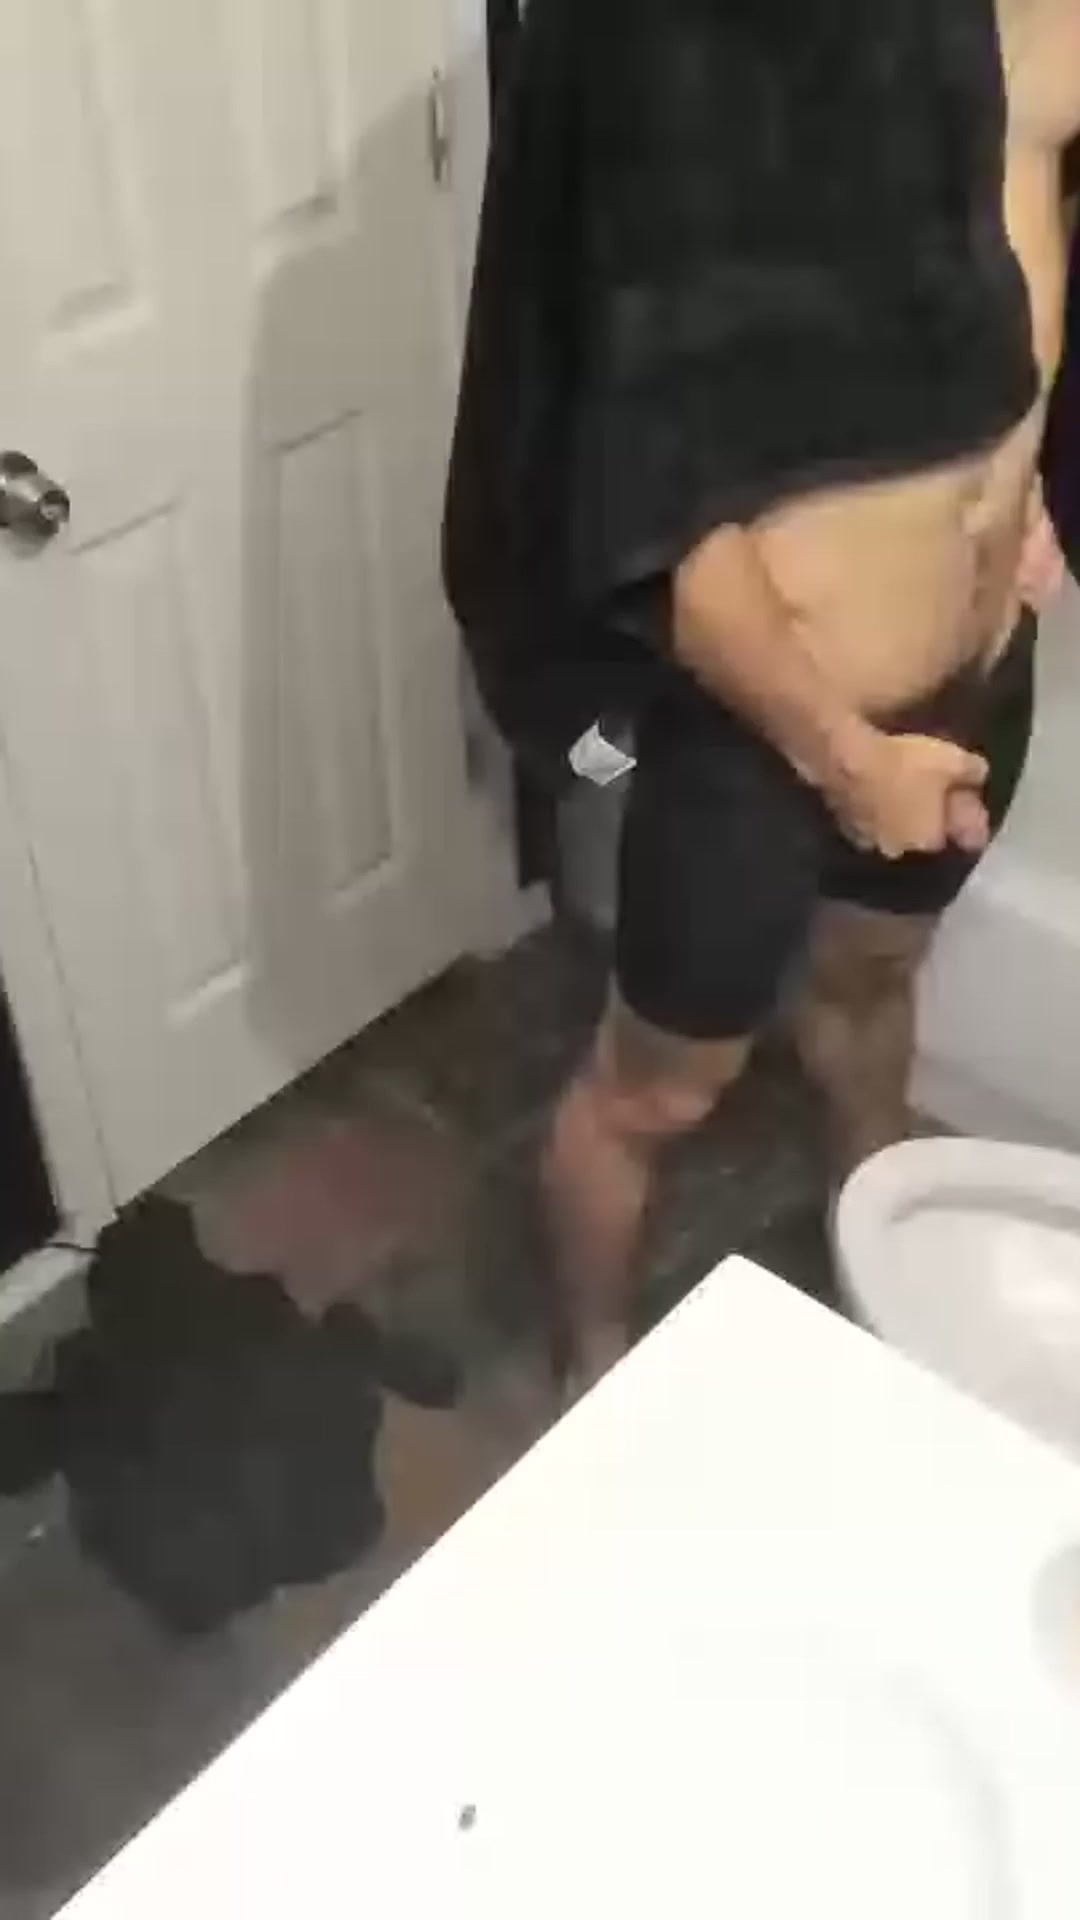 MICHAEL OUT OF SHOWER AND PISSING